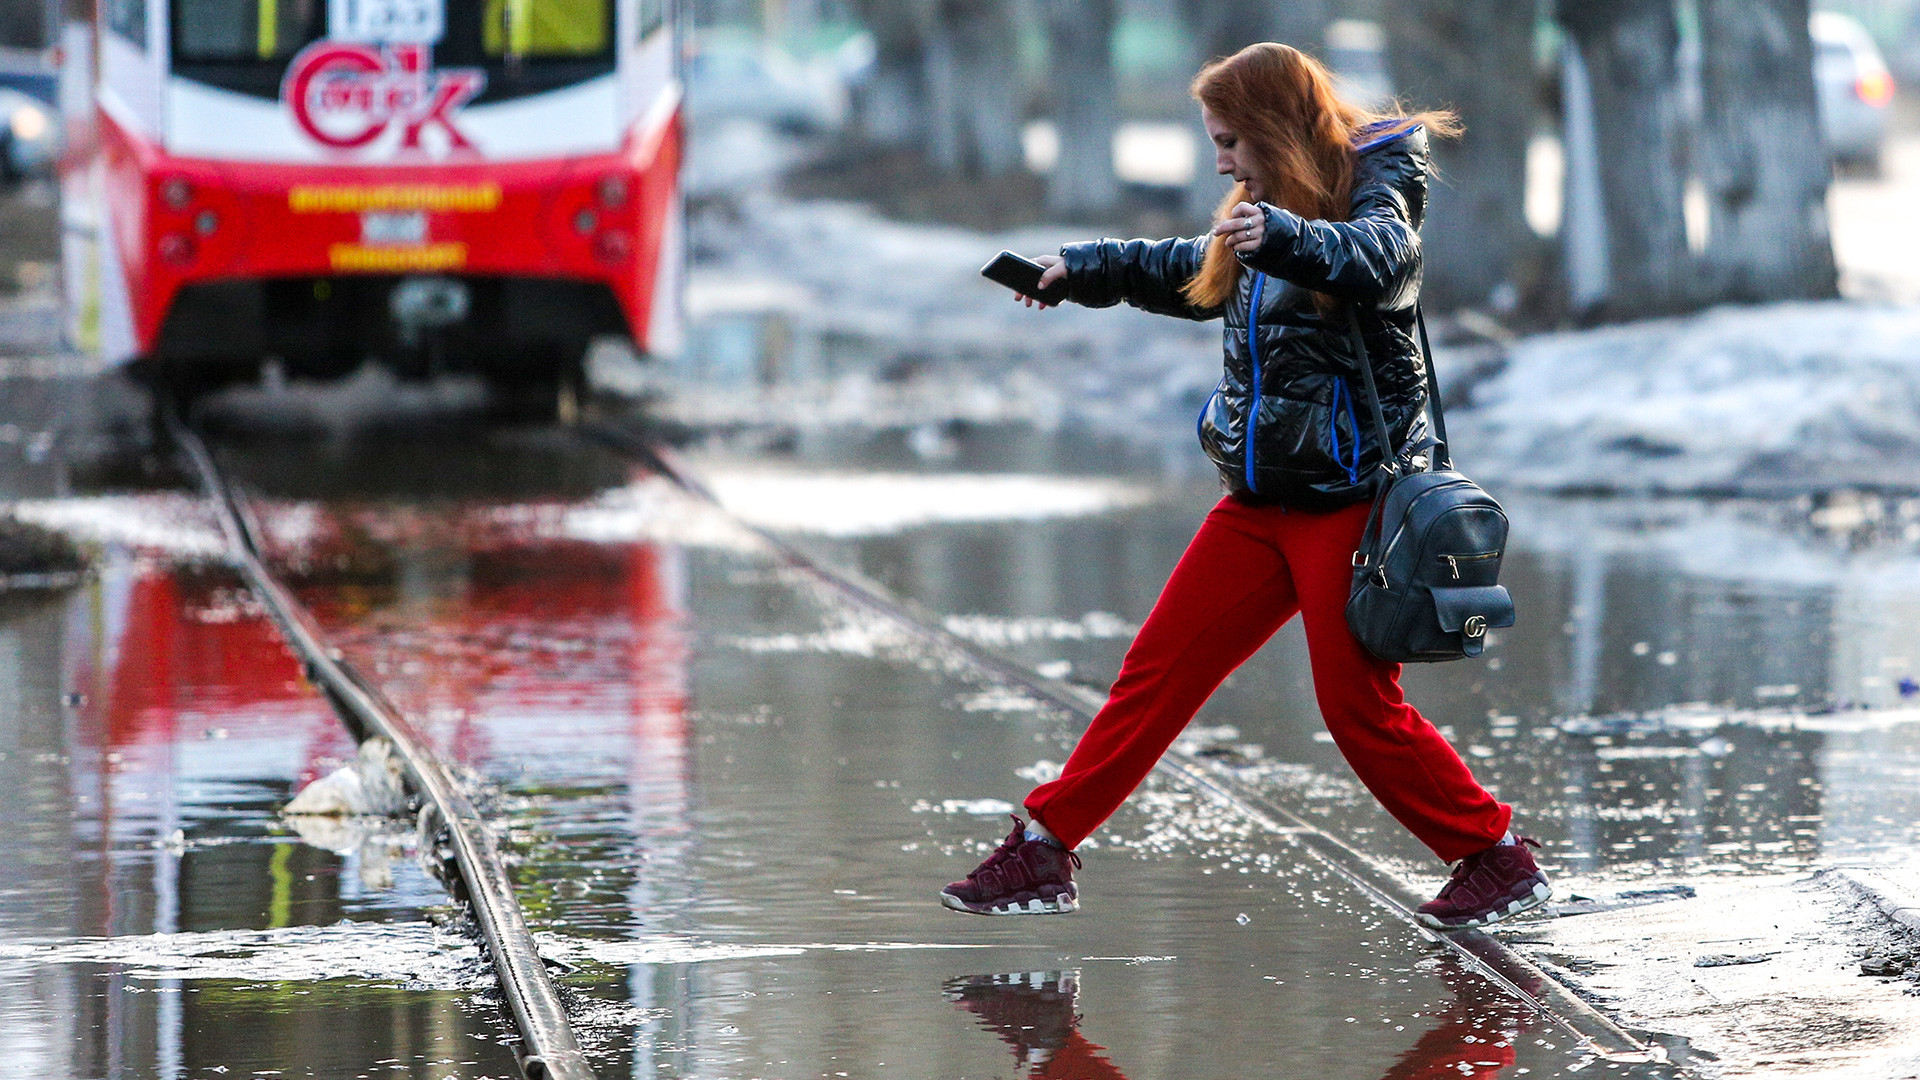 Omsk,Russia - April 7, 2021: A woman oversteps water in a flooded street. The flooding is caused by snowmelt